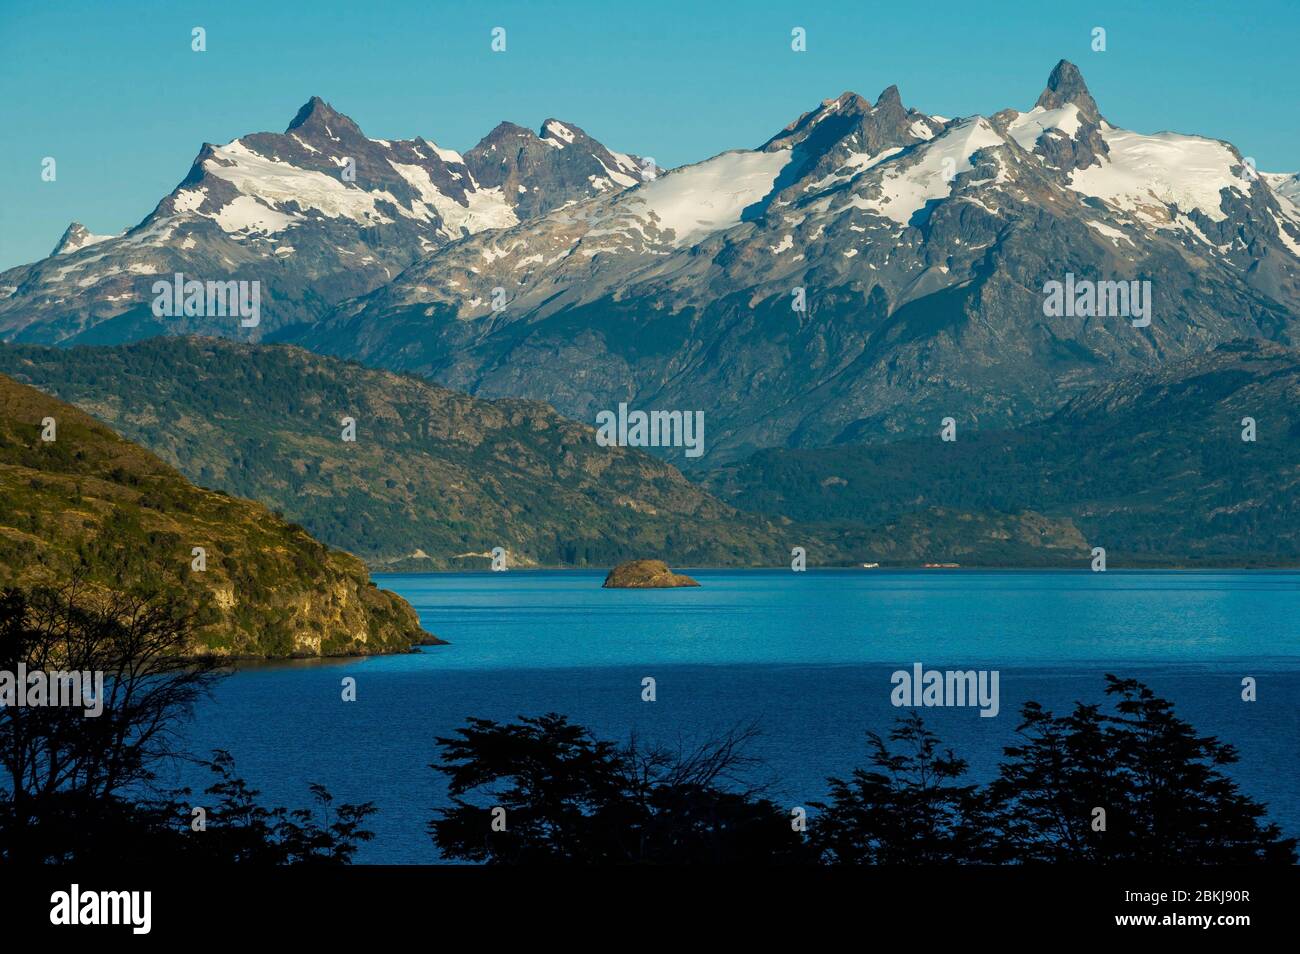 Chile, Patagonia, Aysen, Coyhaique, General Carrera lake, under the foothills of Mount San Valentin 4058m Stock Photo